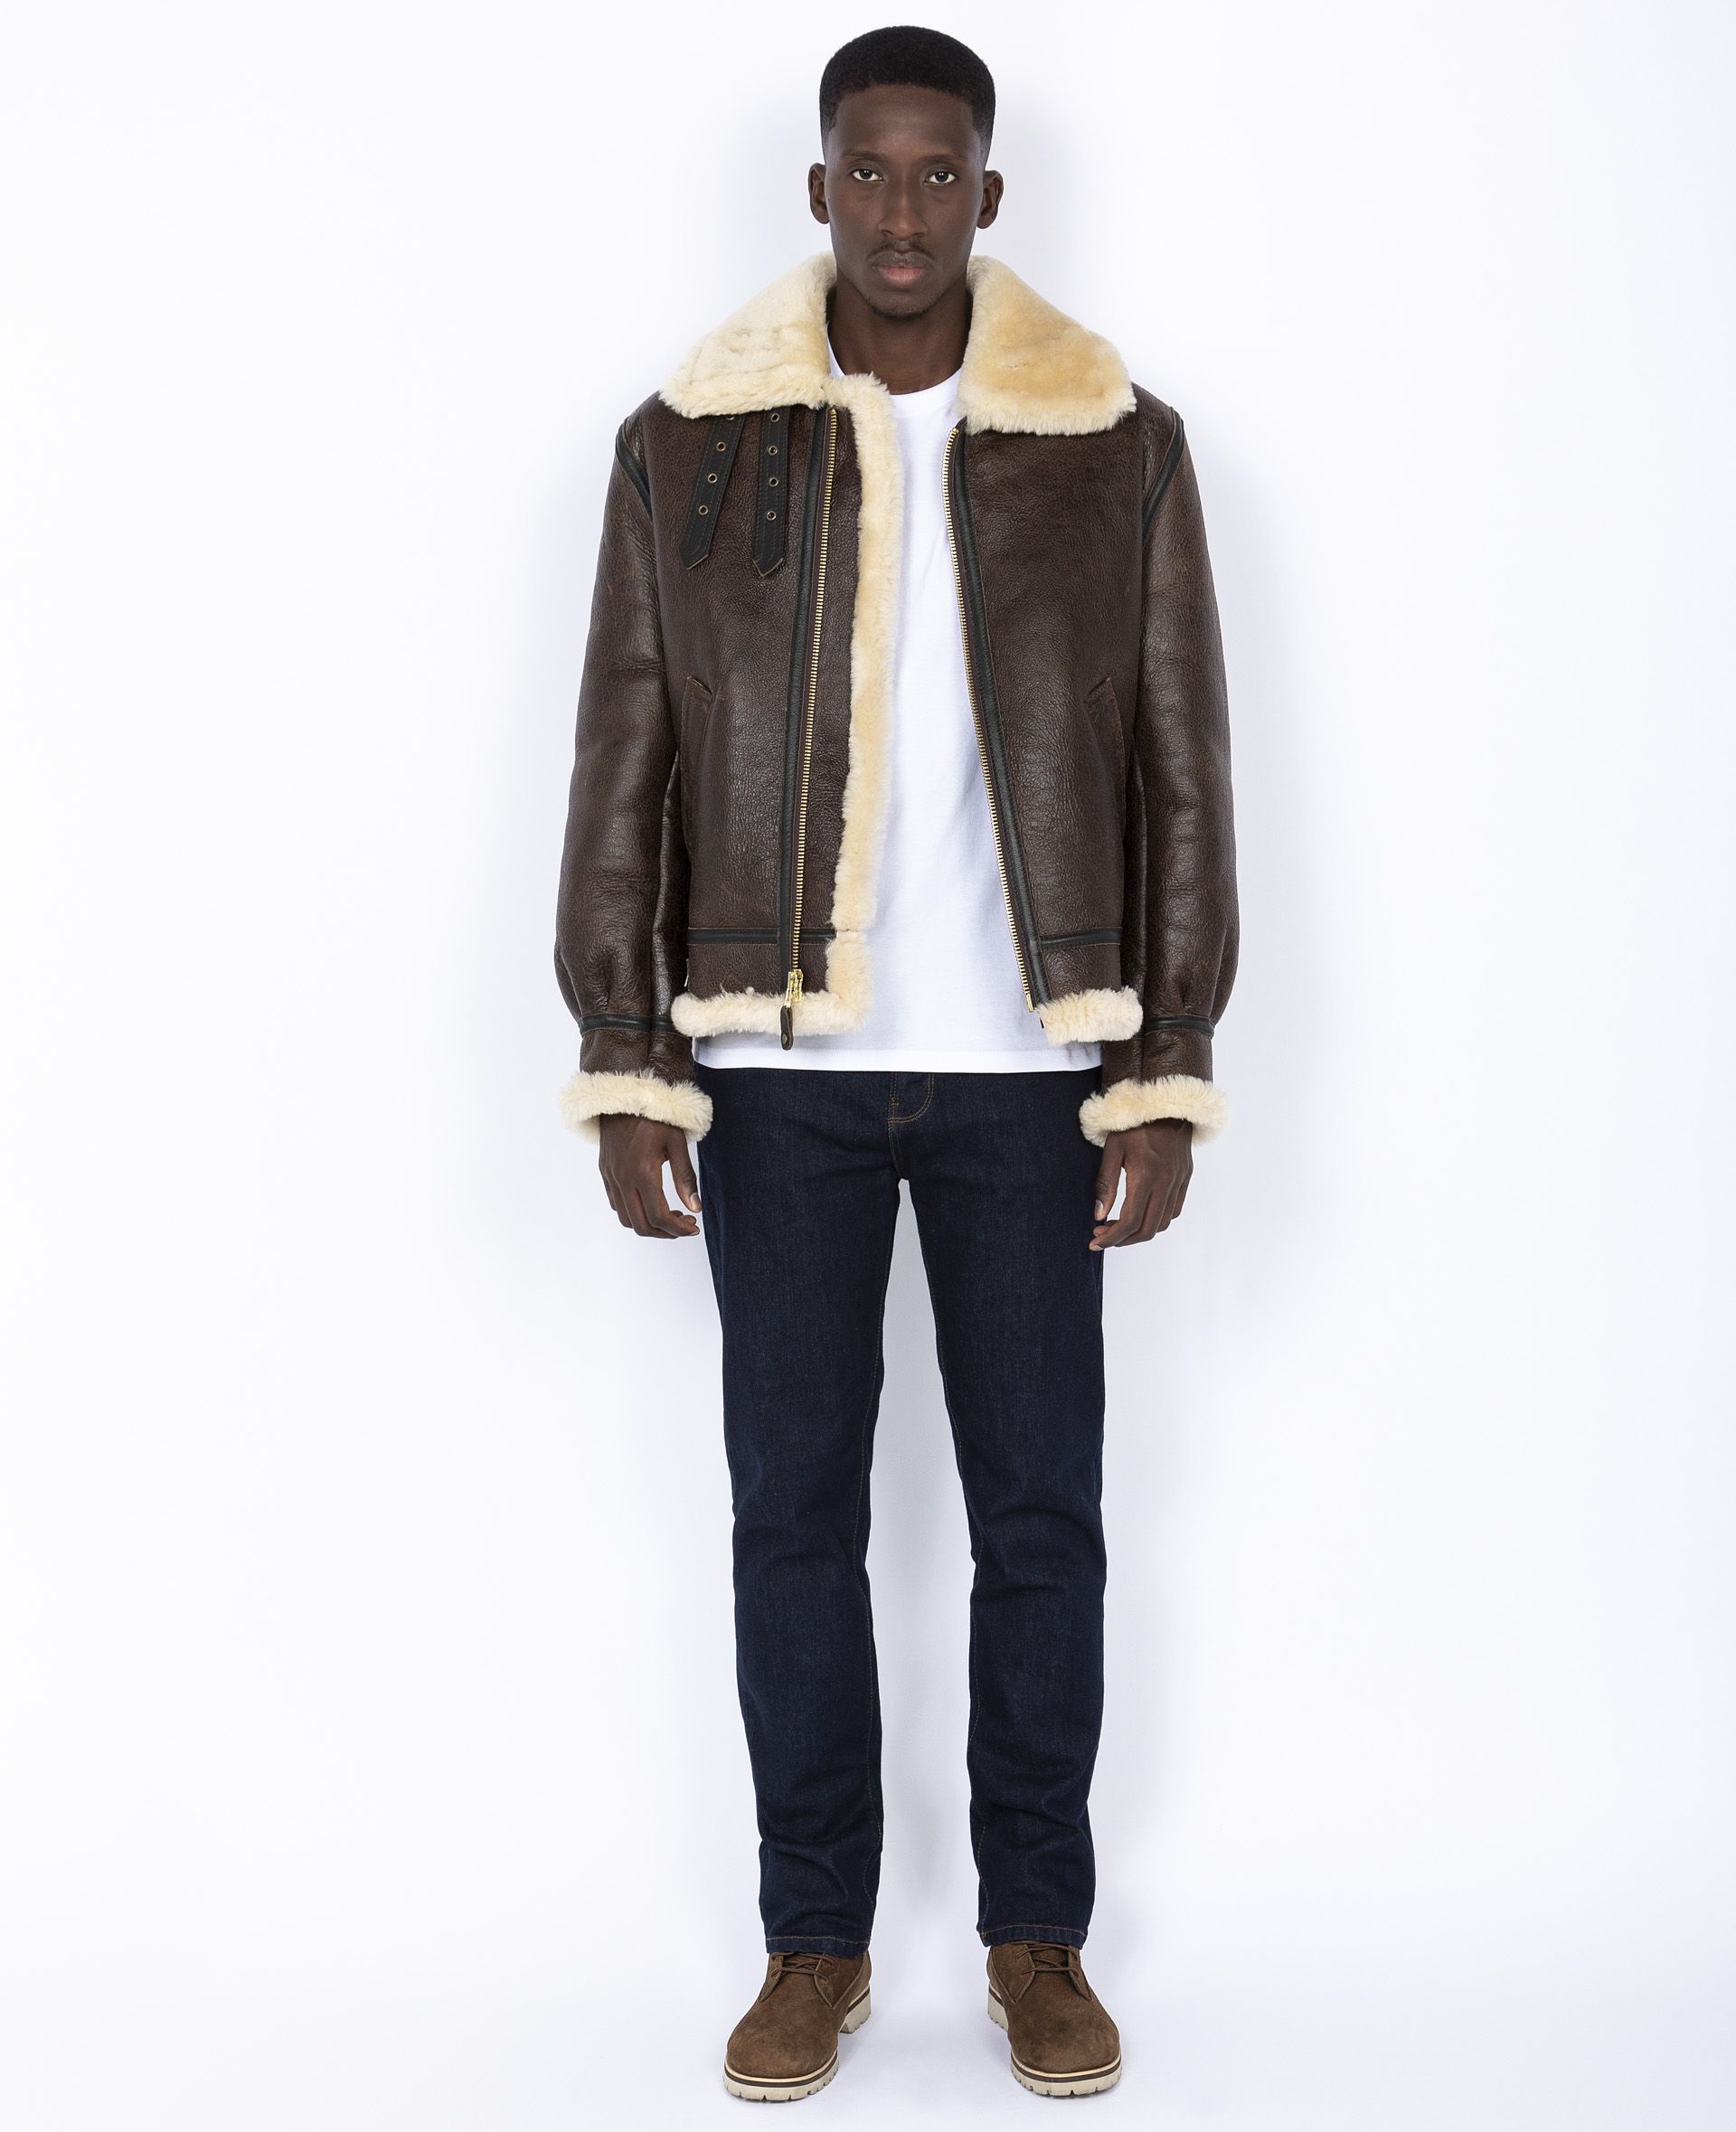 Shearling B3 Bomber Jacket Clearance Prices, Save 47% | jlcatj.gob.mx